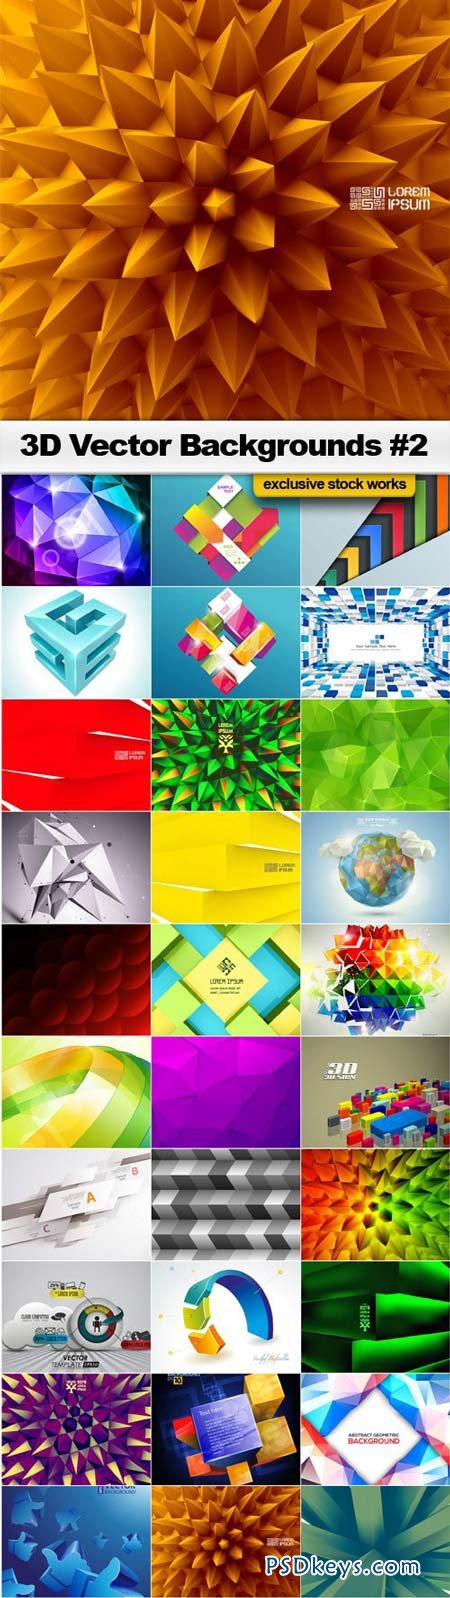 3D Vector Backgrounds #2 - 30xEPS